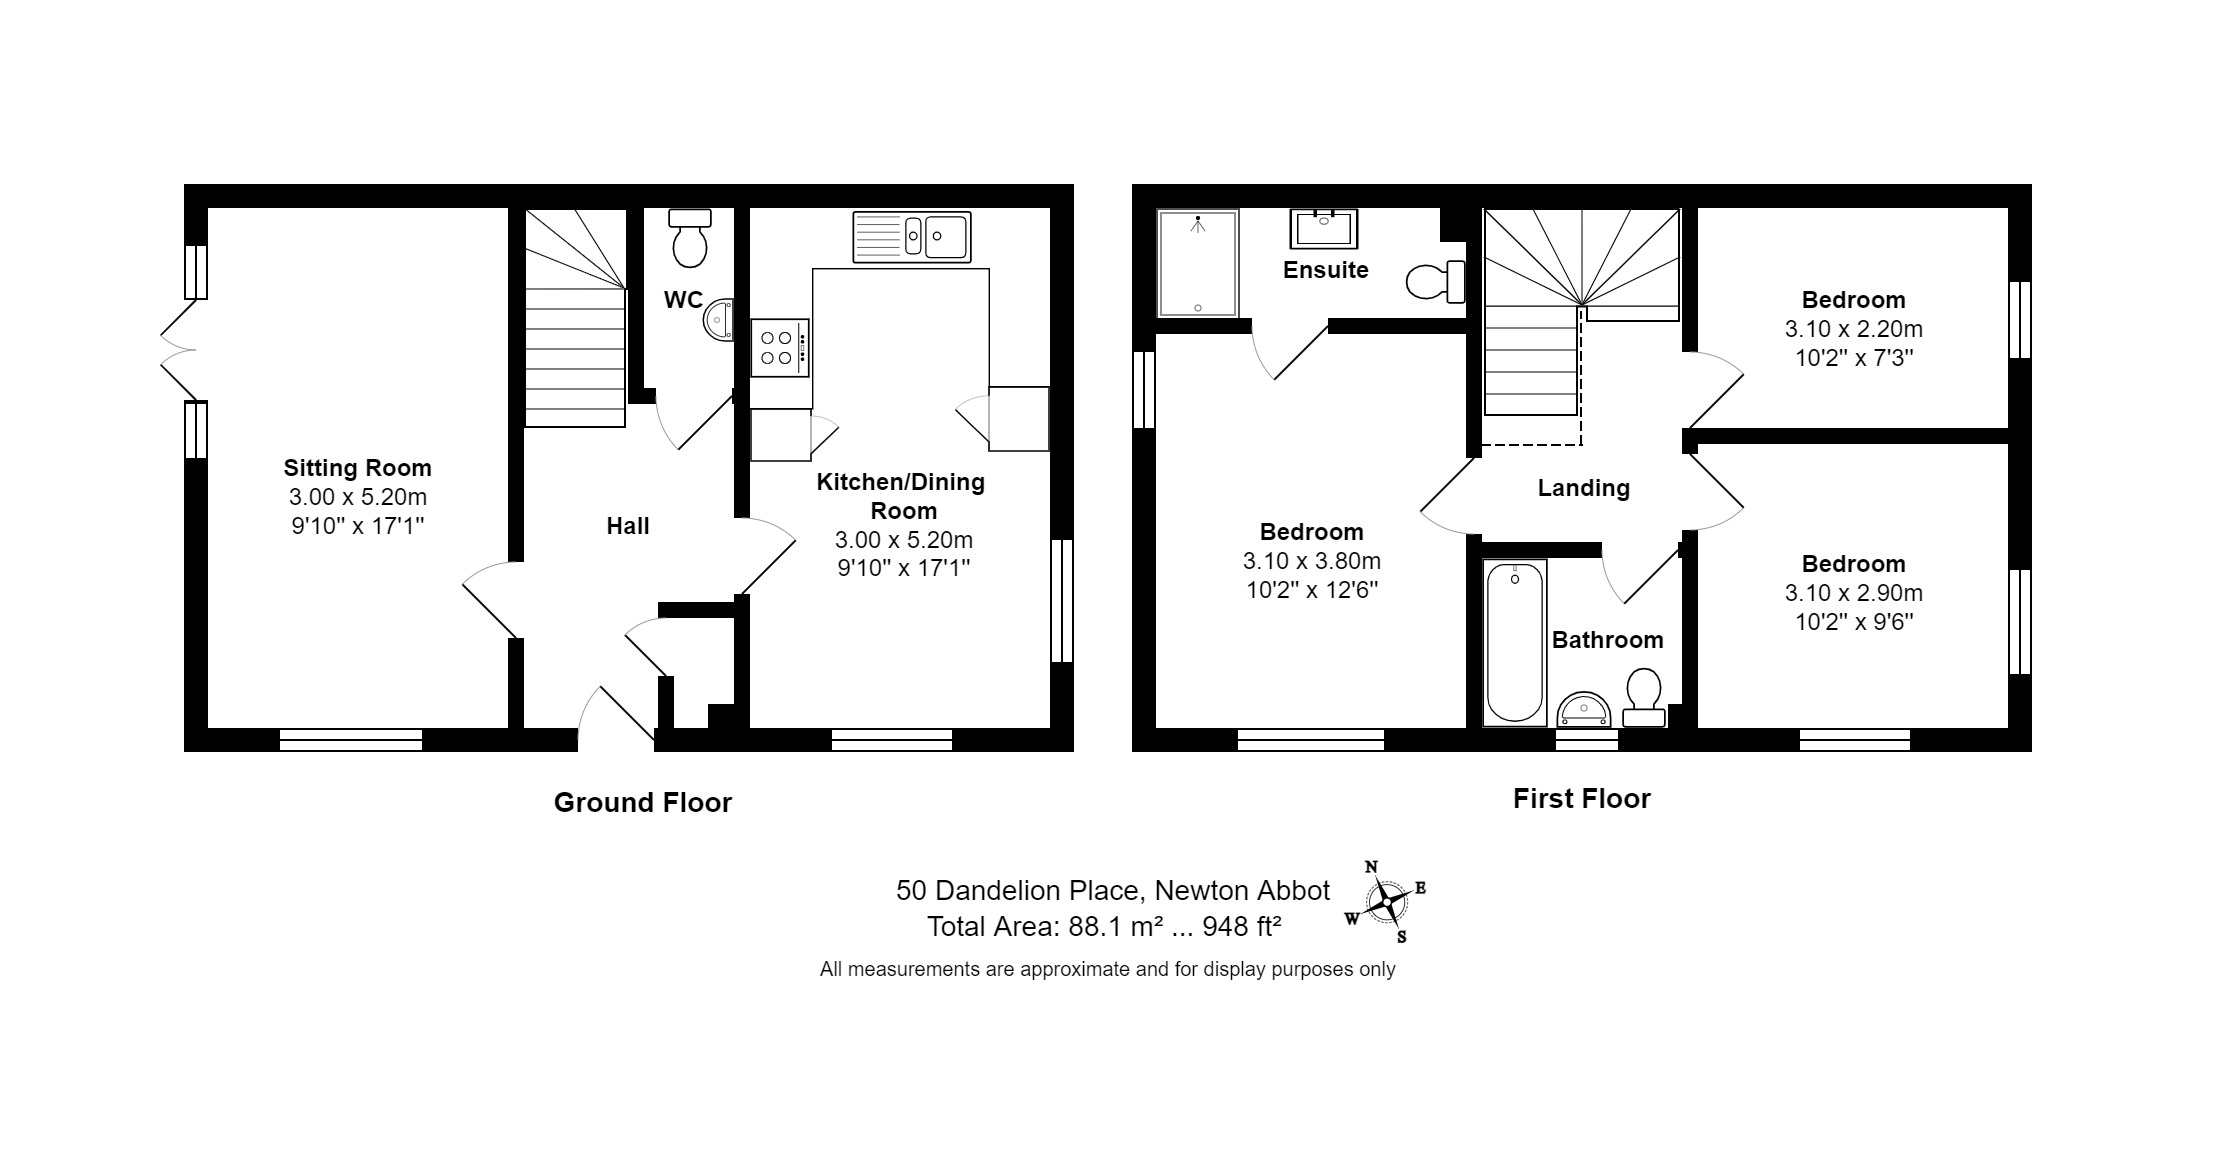 3 bed detached house to rent in Dandelion Place, Newton Abbot - Property floorplan